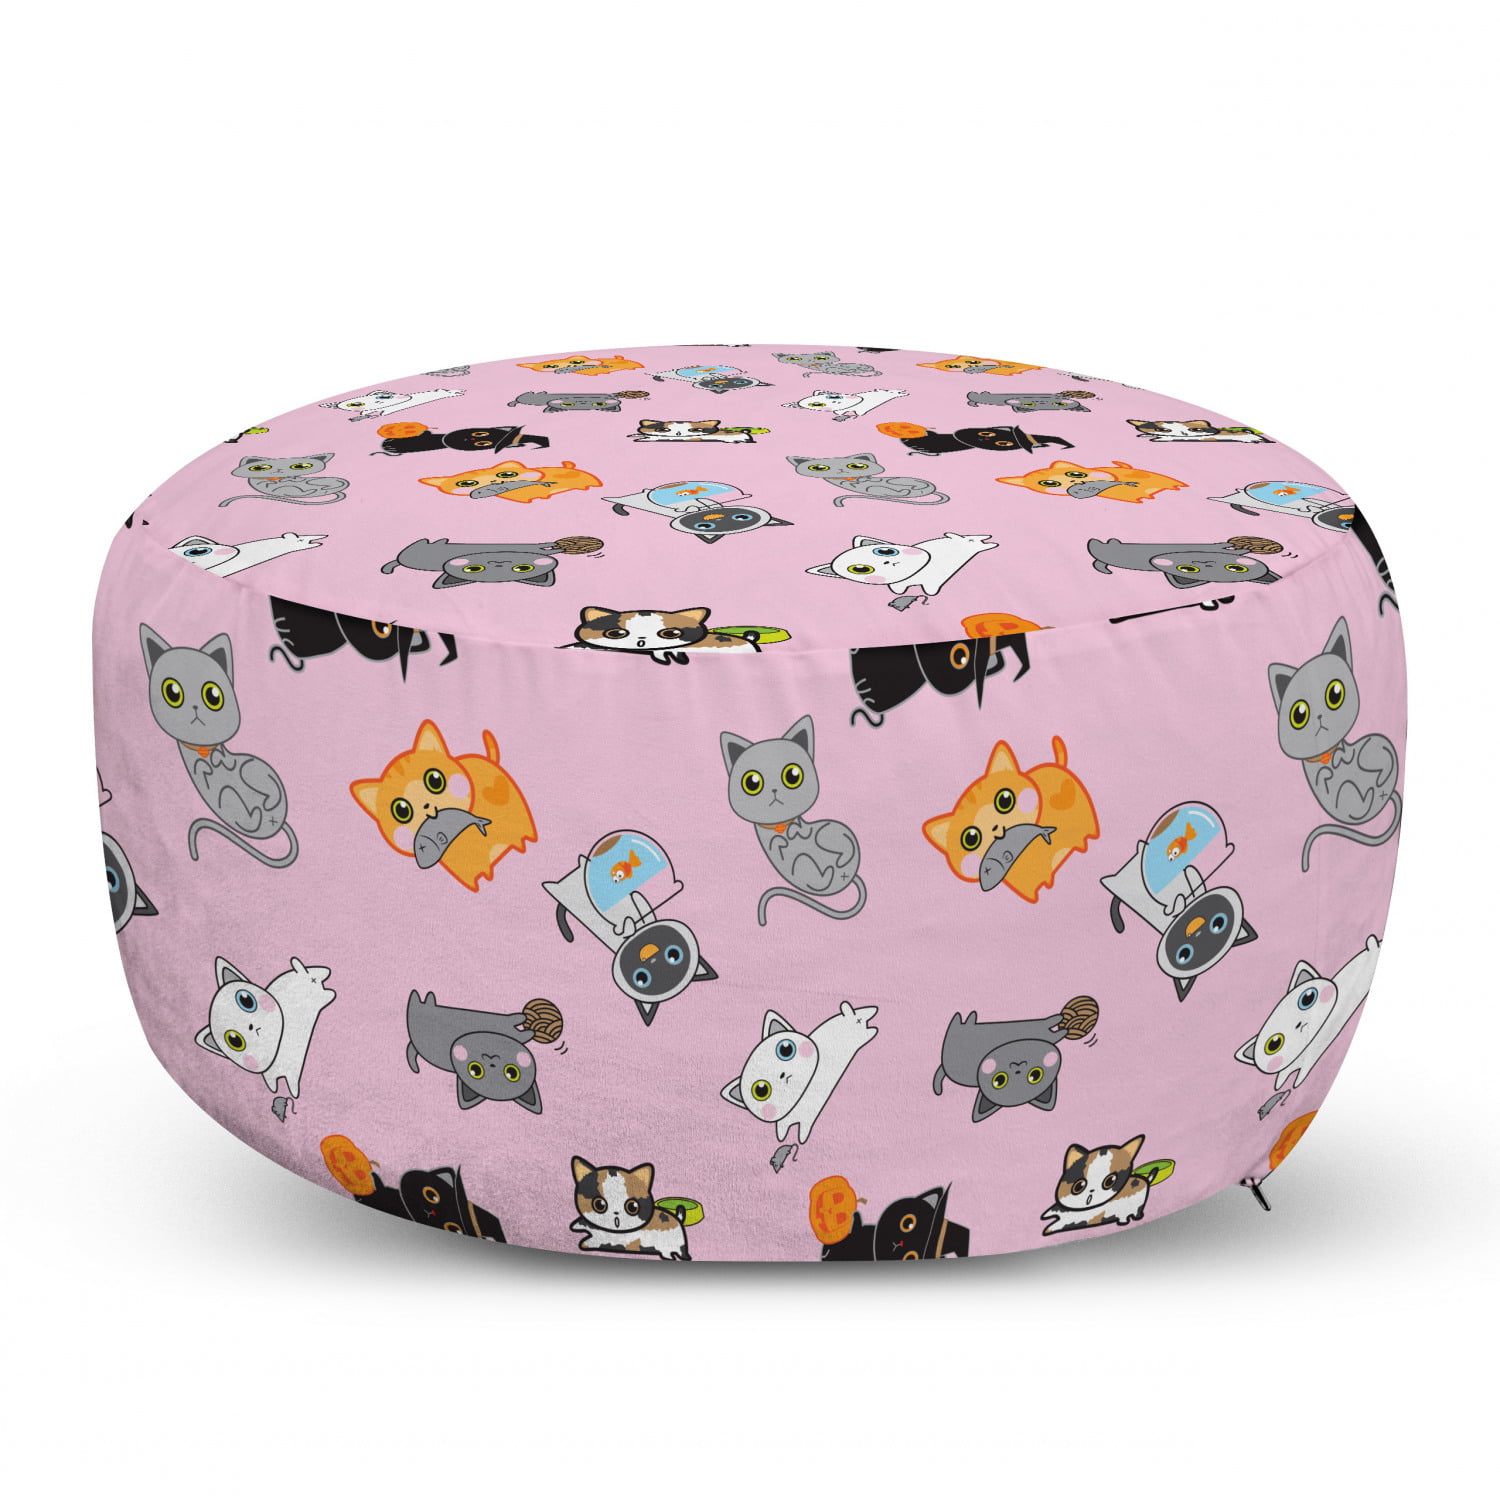 Under Desk Foot Stool for Living Room Office Ottoman with Cover Ambesonne Cat Rectangle Pouf Multicolor Colorful Kittens Playing with Fish Mice and Yarnball Different Breeds of Feline 25 